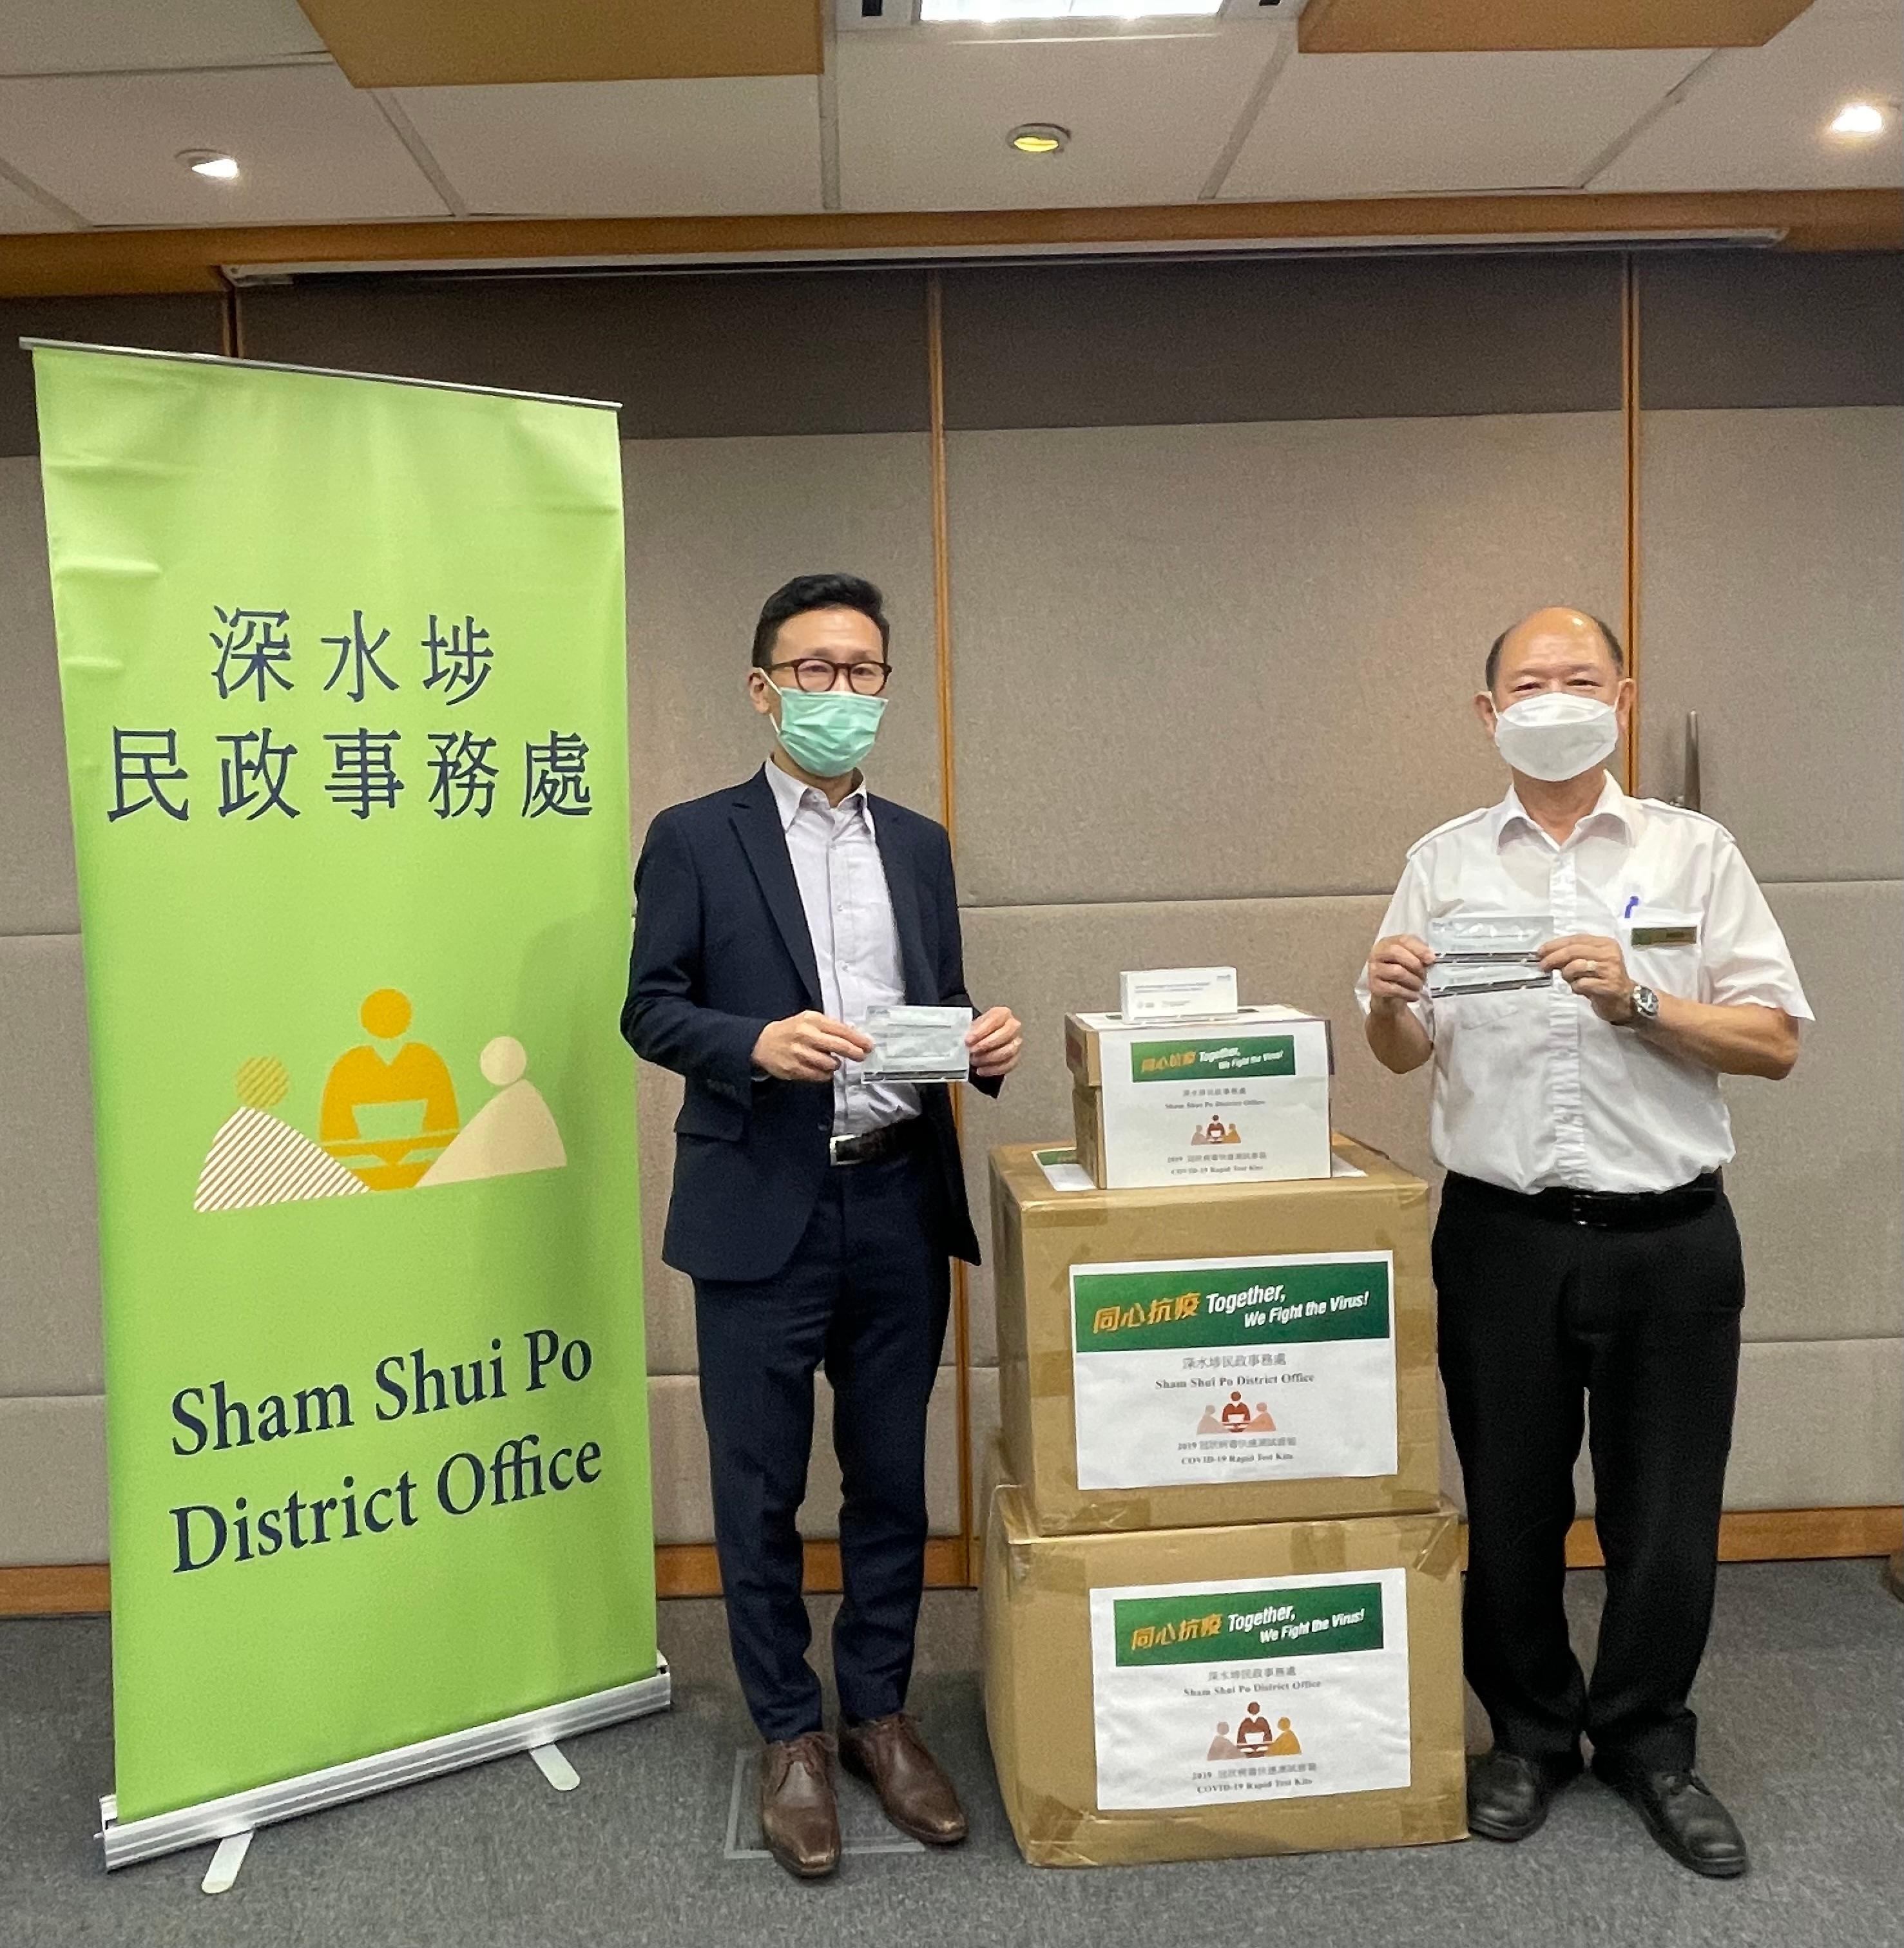 The Sham Shui Po District Office today (July 14) distributed rapid test kits to households, cleansing workers and property management staff living and working in Parc Oasis for voluntary testing through the property management company.